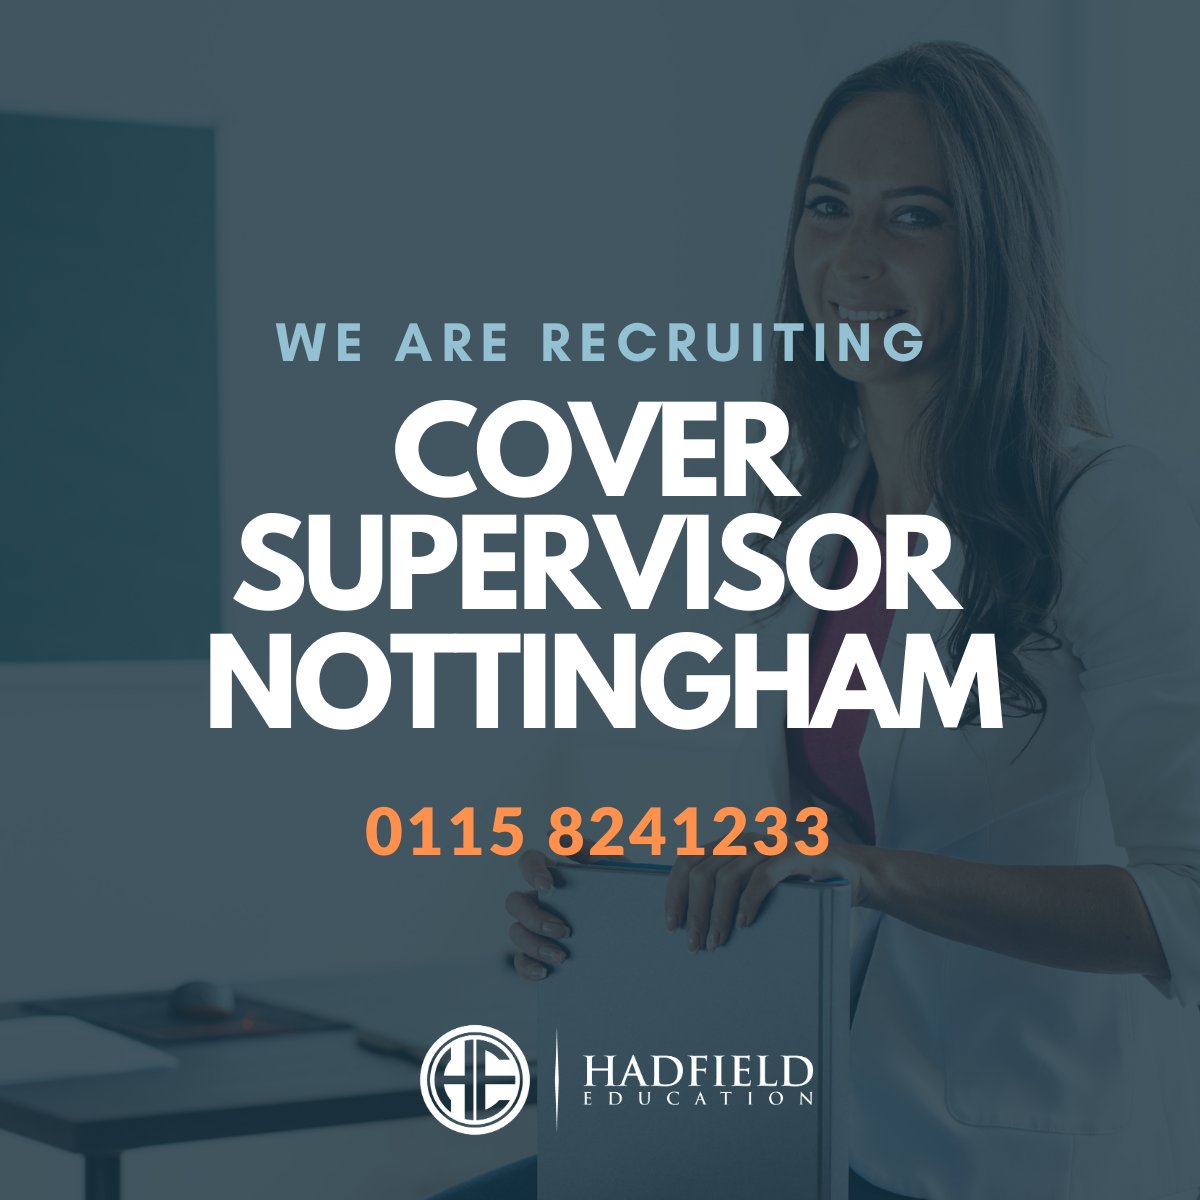 📢 Job opportunity! 📢 We're seeking a Cover Supervisor in 📍Nottingham 🎓 Apply now and be part of our great team! 💼 #NottinghamJobs #TeachingJobs #CoverSupervisorJobs 🚀 bit.ly/3OS5WYX